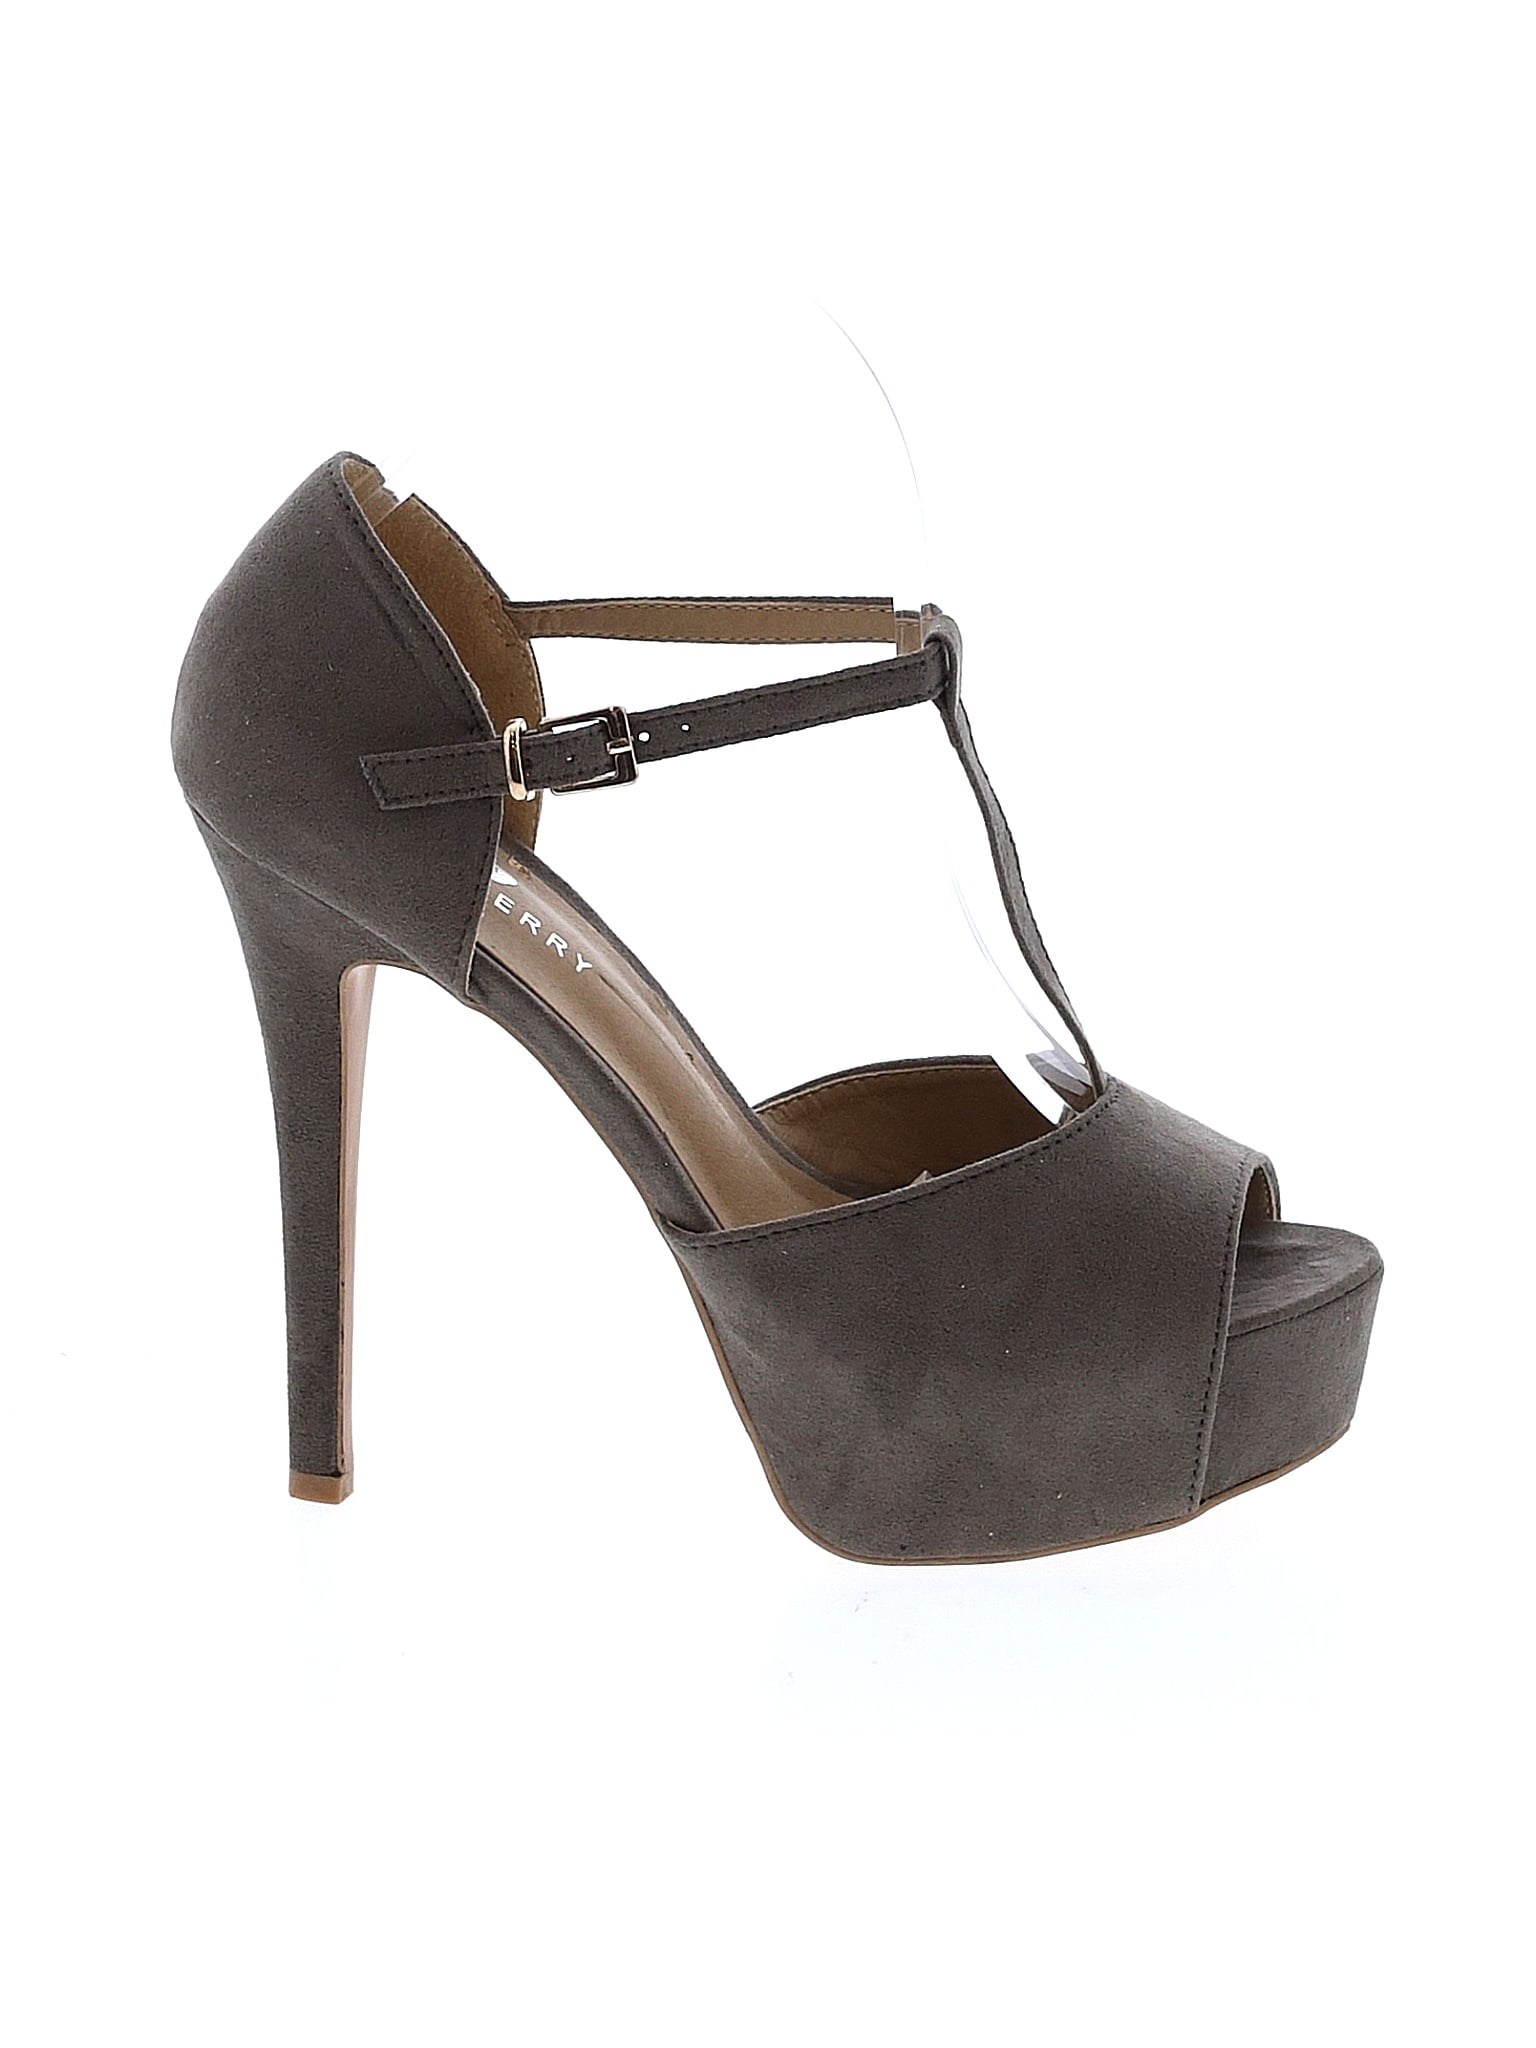 Riverberry Solid Gray Heels Size 8 1/2 - 50% off